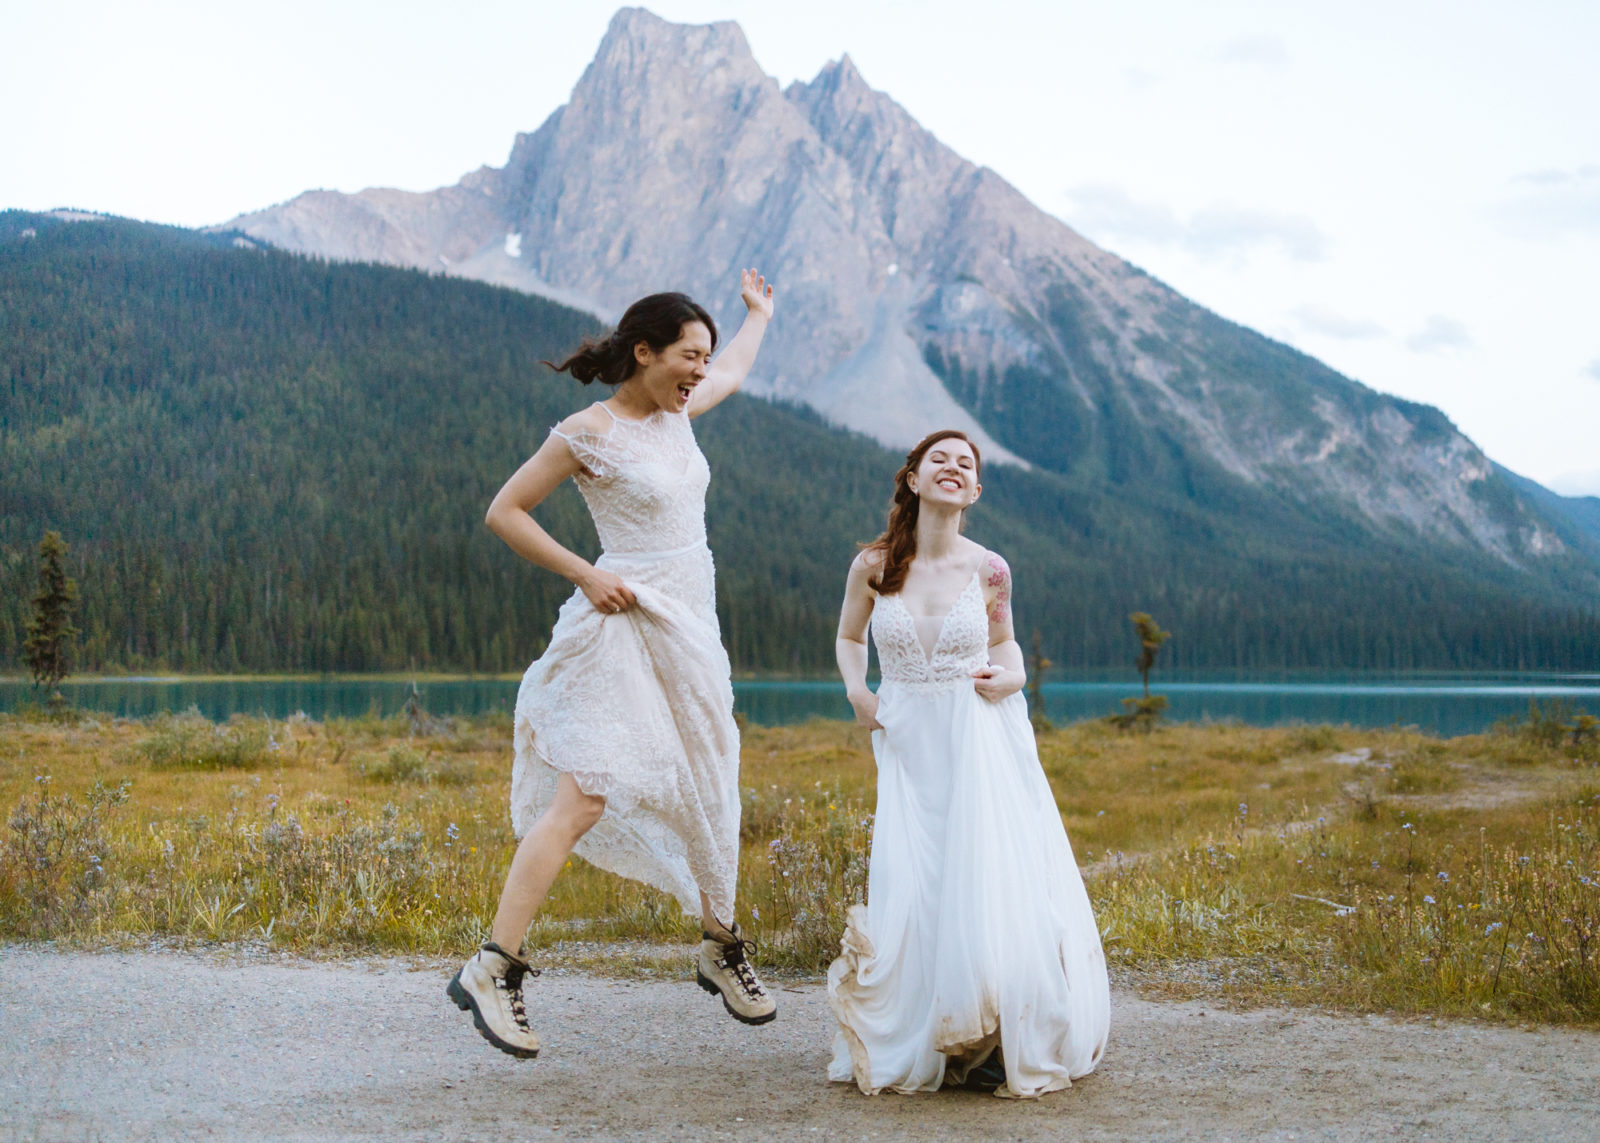 Newly wed couple strike a playful pose in their gowns and hiking boots with the mountains of Yoho National Park in the background